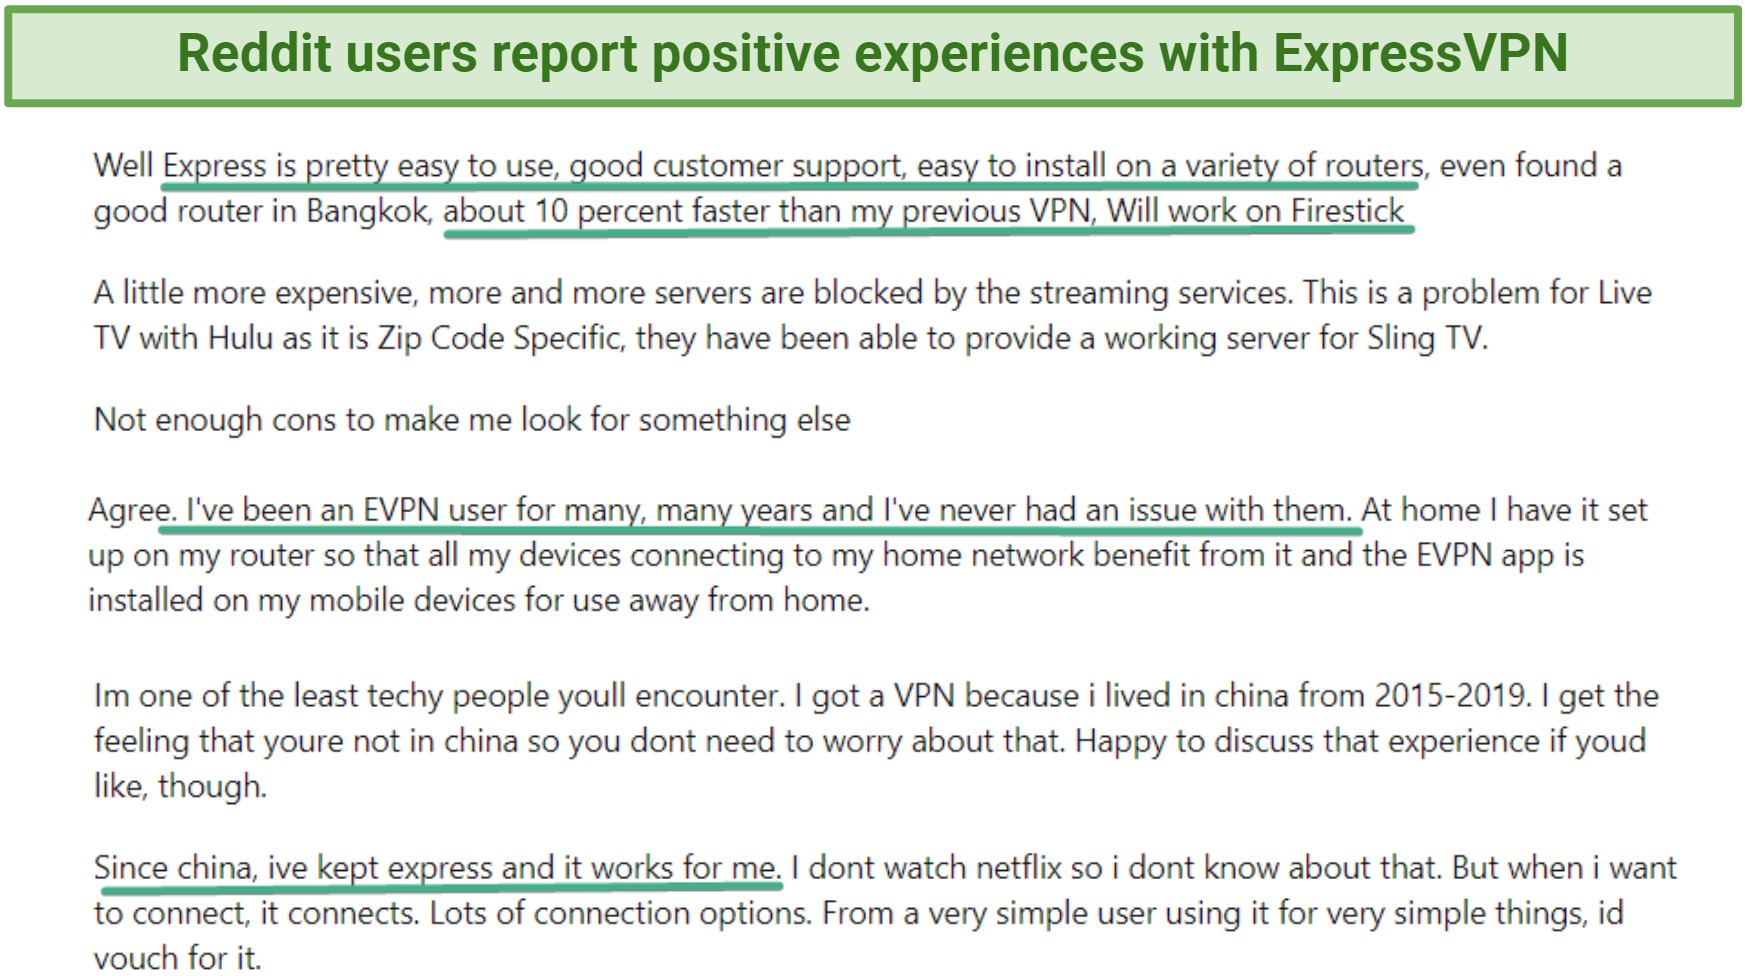 Screenshot highlighting users' experience with ExpressVPN